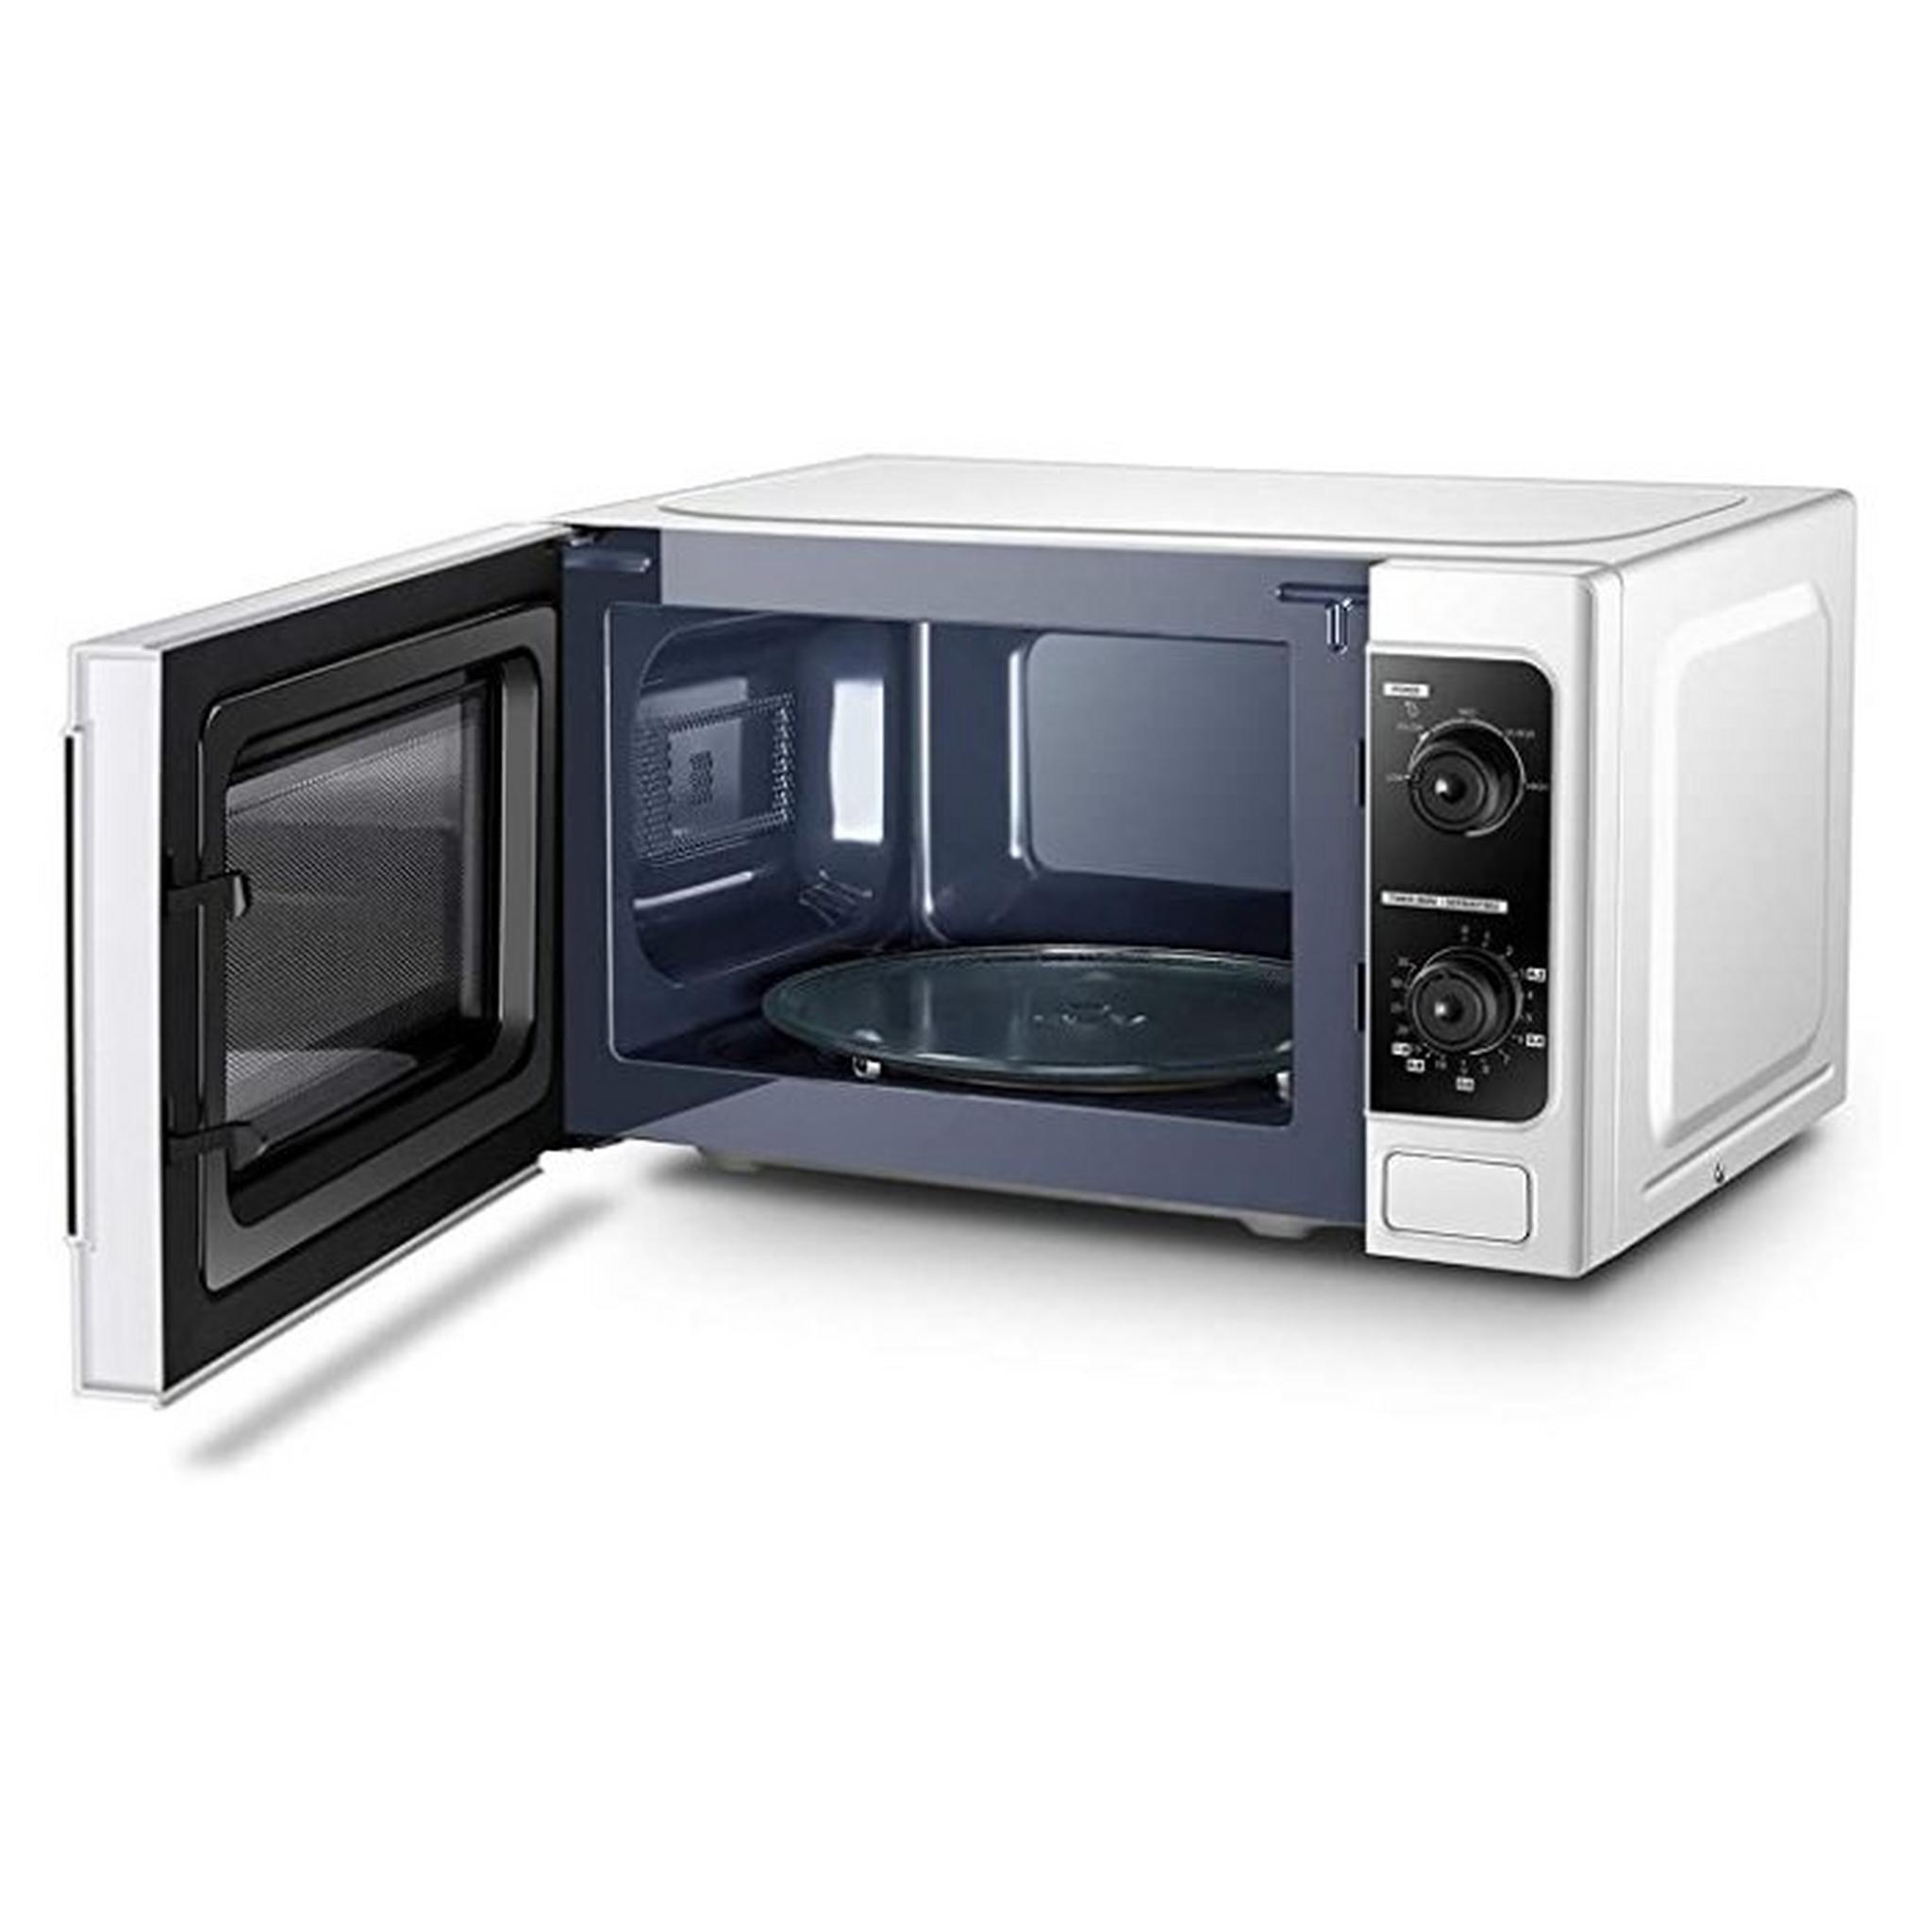 Toshiba 20 L Microwave Oven 800W (MM-MM20P)